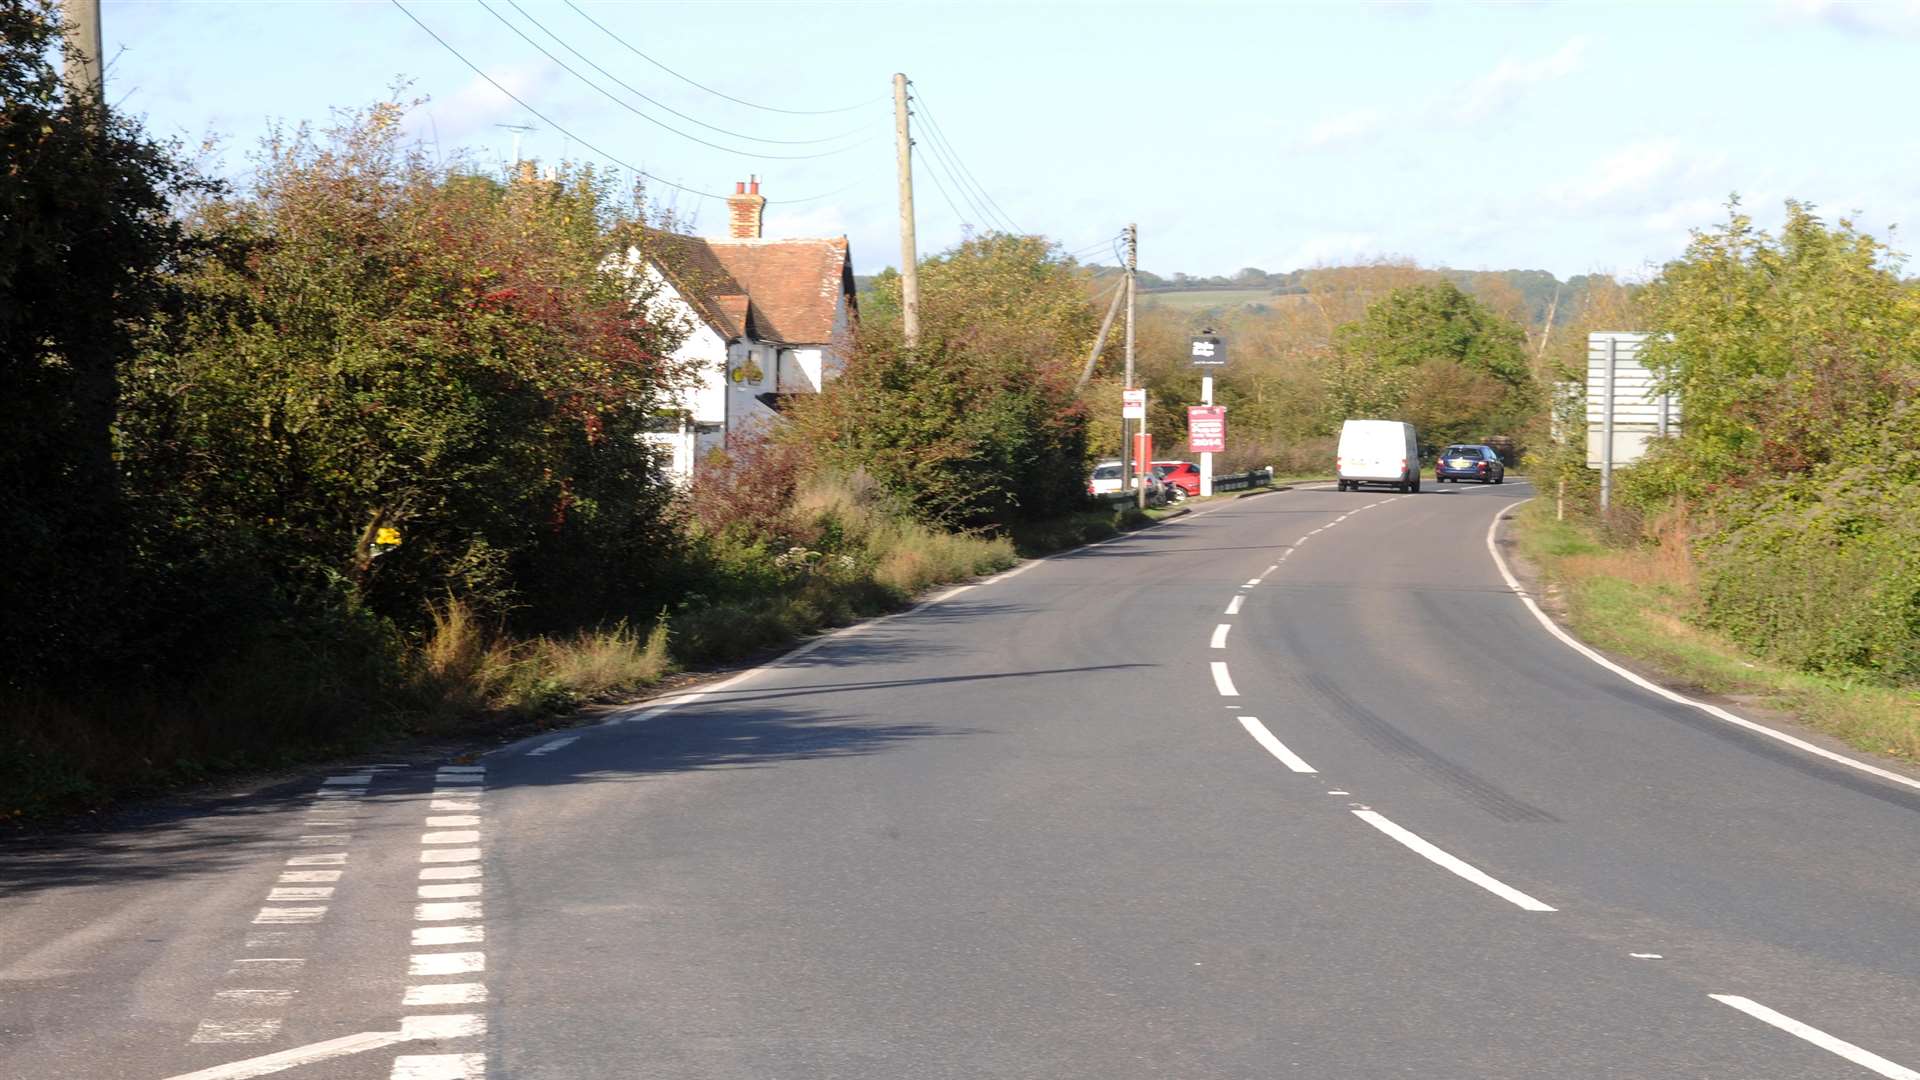 Junction of Staplehurst Road and Maidstone Road, at the bottom of Linton Hill